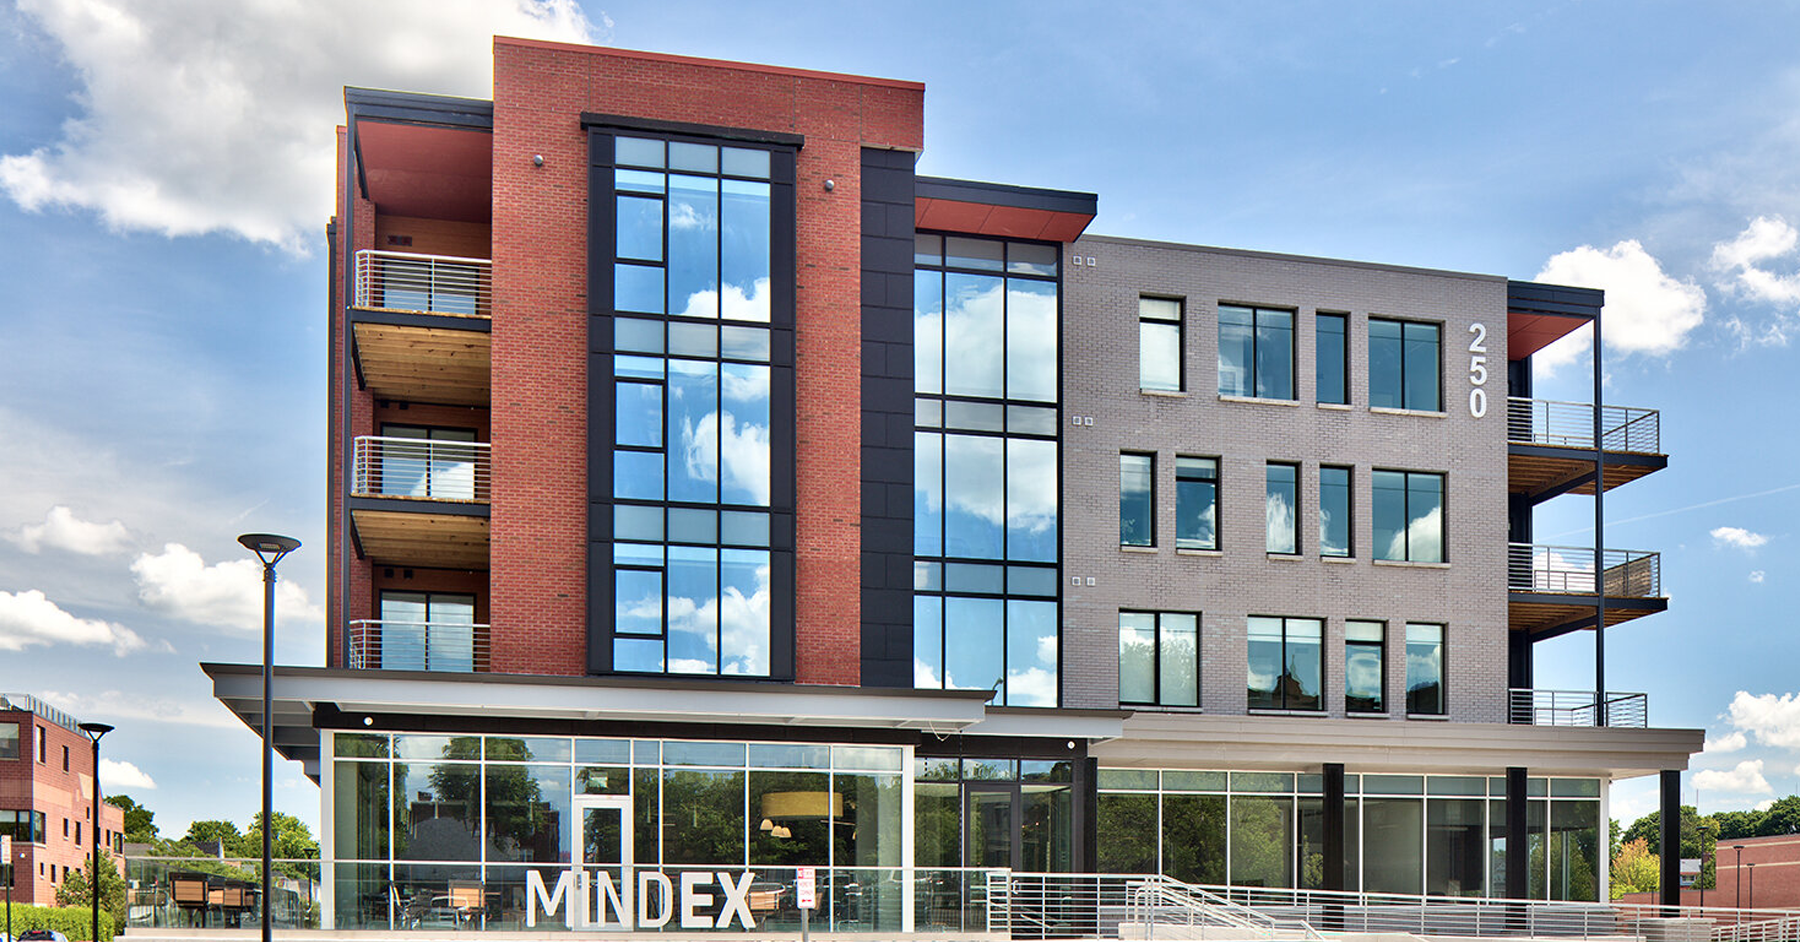 Mindex Building in Rochester